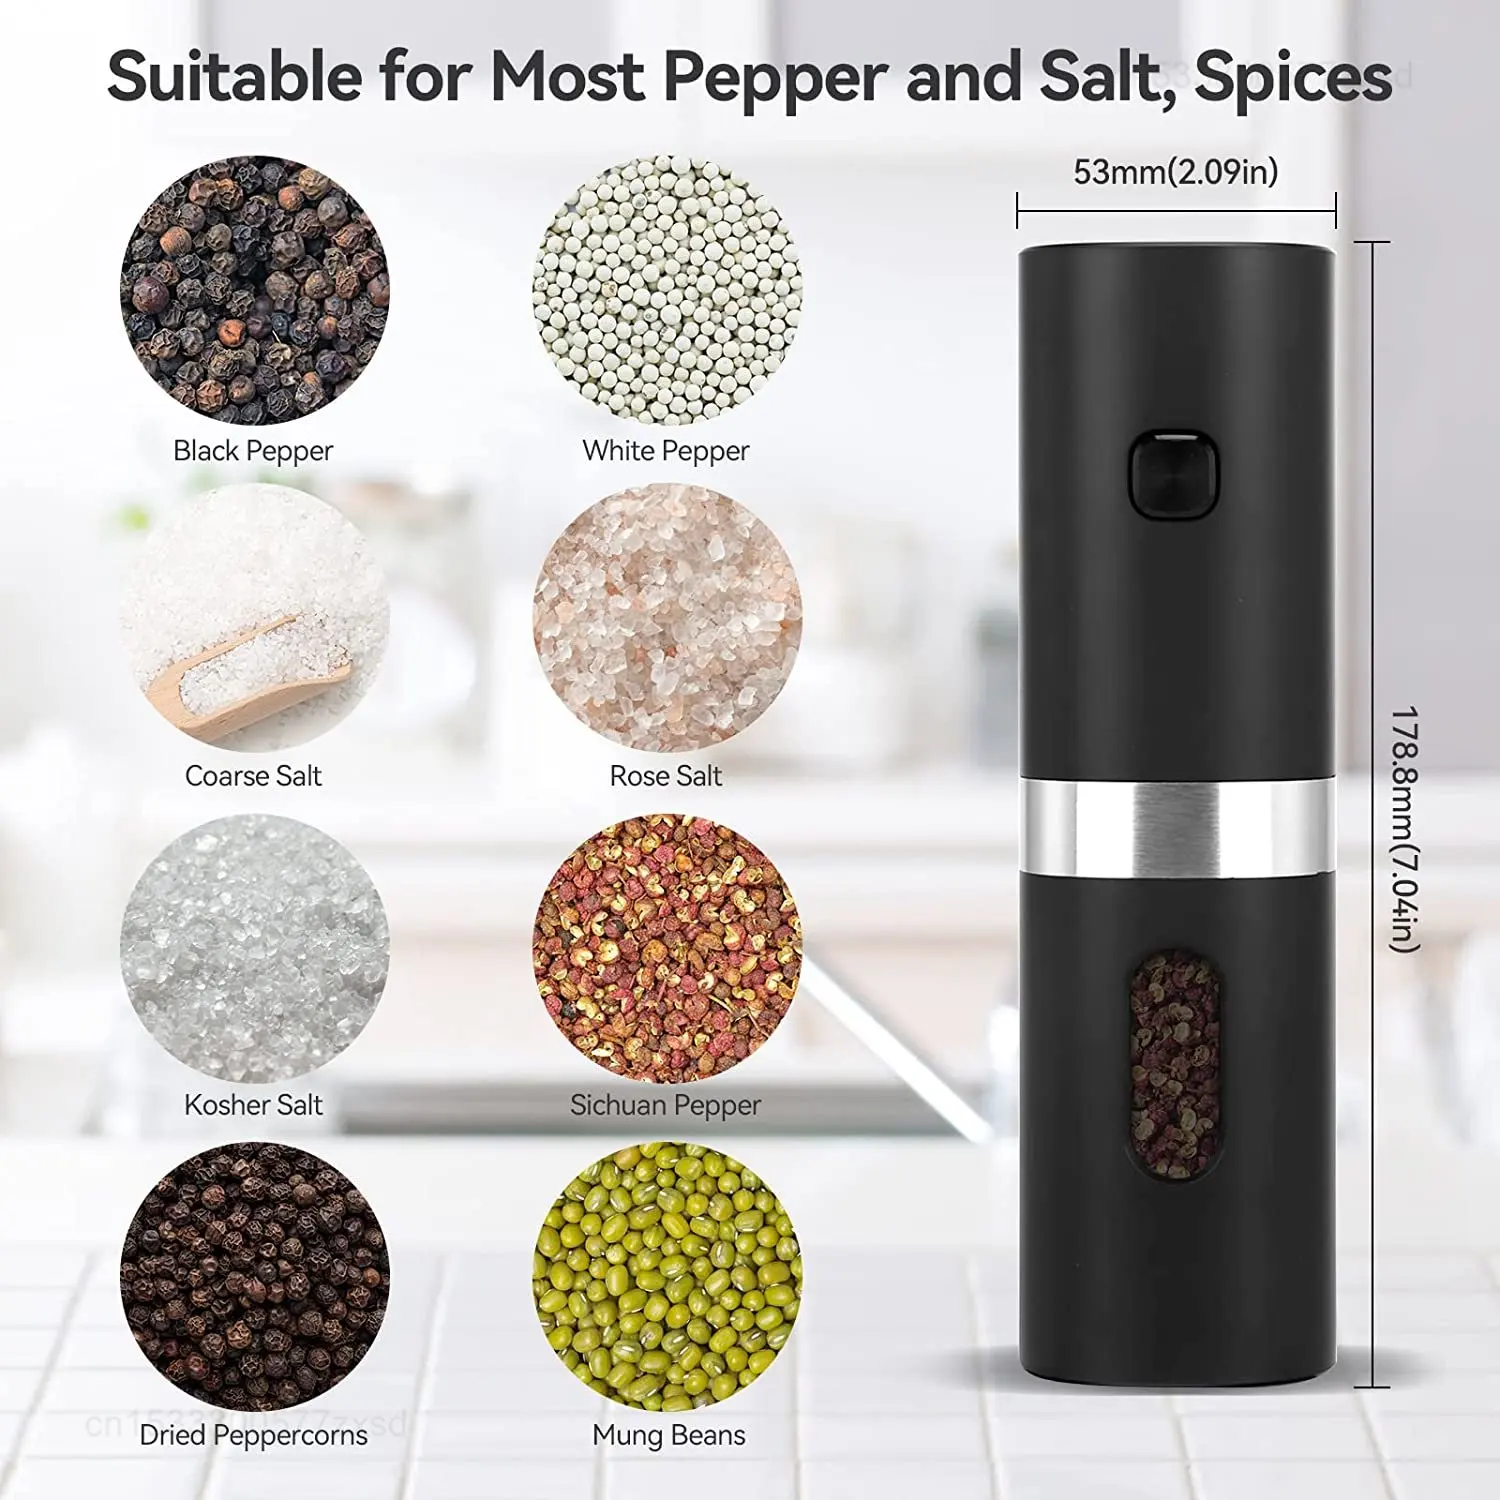 https://ae01.alicdn.com/kf/S82a699bd35b14db2a74e622fee164552p/Circle-joy-Electric-Automatic-Salt-and-Pepper-Grinder-Set-Mill-Refillable-with-Rechargeable-Base-2-Adjustable.jpg